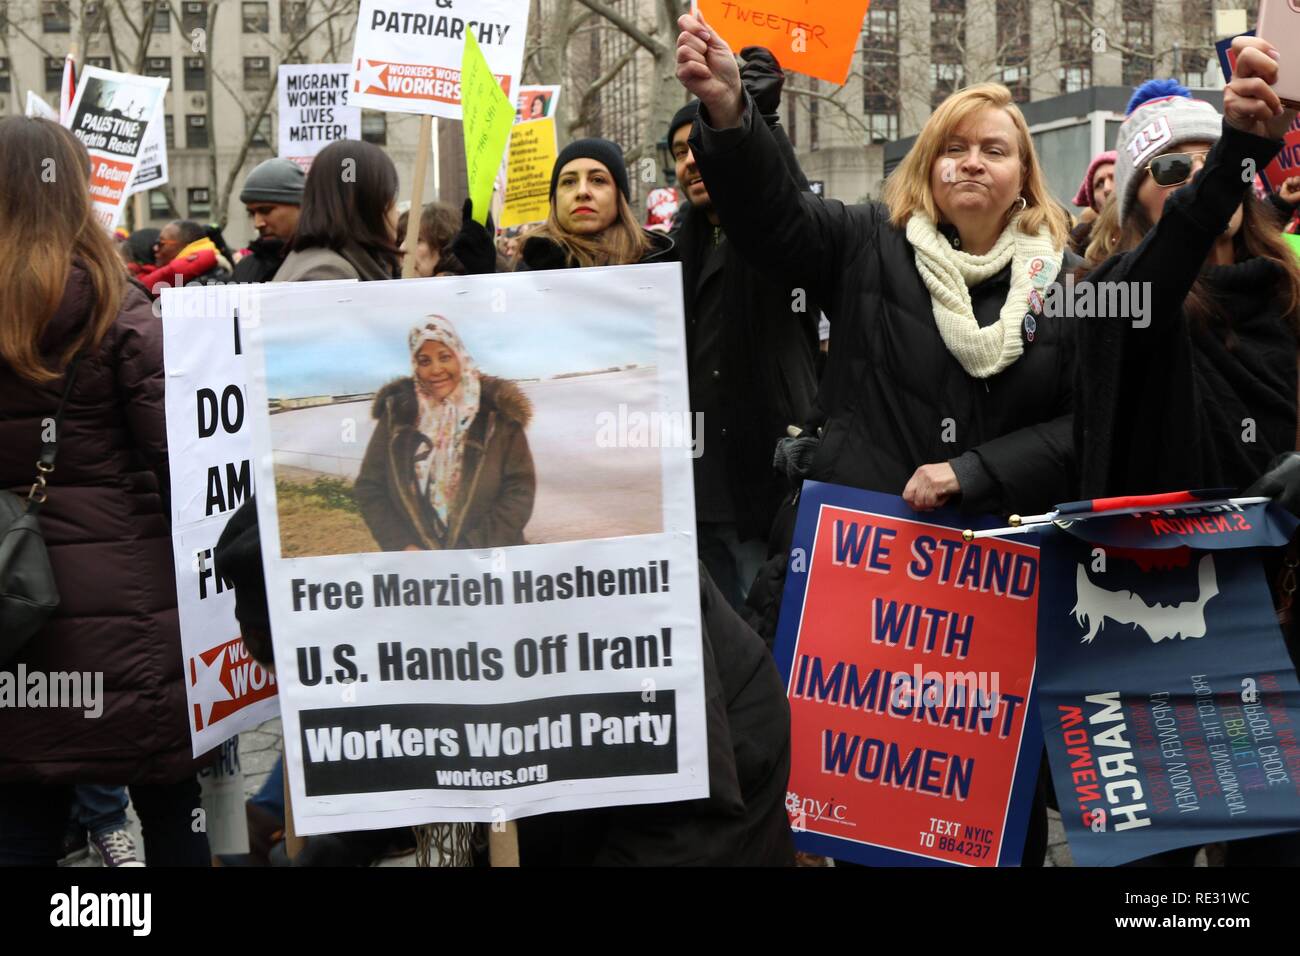 New York City, New York, USA. 19th Jan, 2019. The Women's March Alliance co-hosted a separate rally with the New York Immigration Coalition in Foley Square on 19 January, 2019. The rally by the controversial organization drew thousands and featured appearances by U.S. Rep. Alexandria Ocasio-Cortez (D-Queens) and American feminist, journalist, and social political Gloria Steinem. Credit: G. Ronald Lopez/ZUMA Wire/Alamy Live News Stock Photo